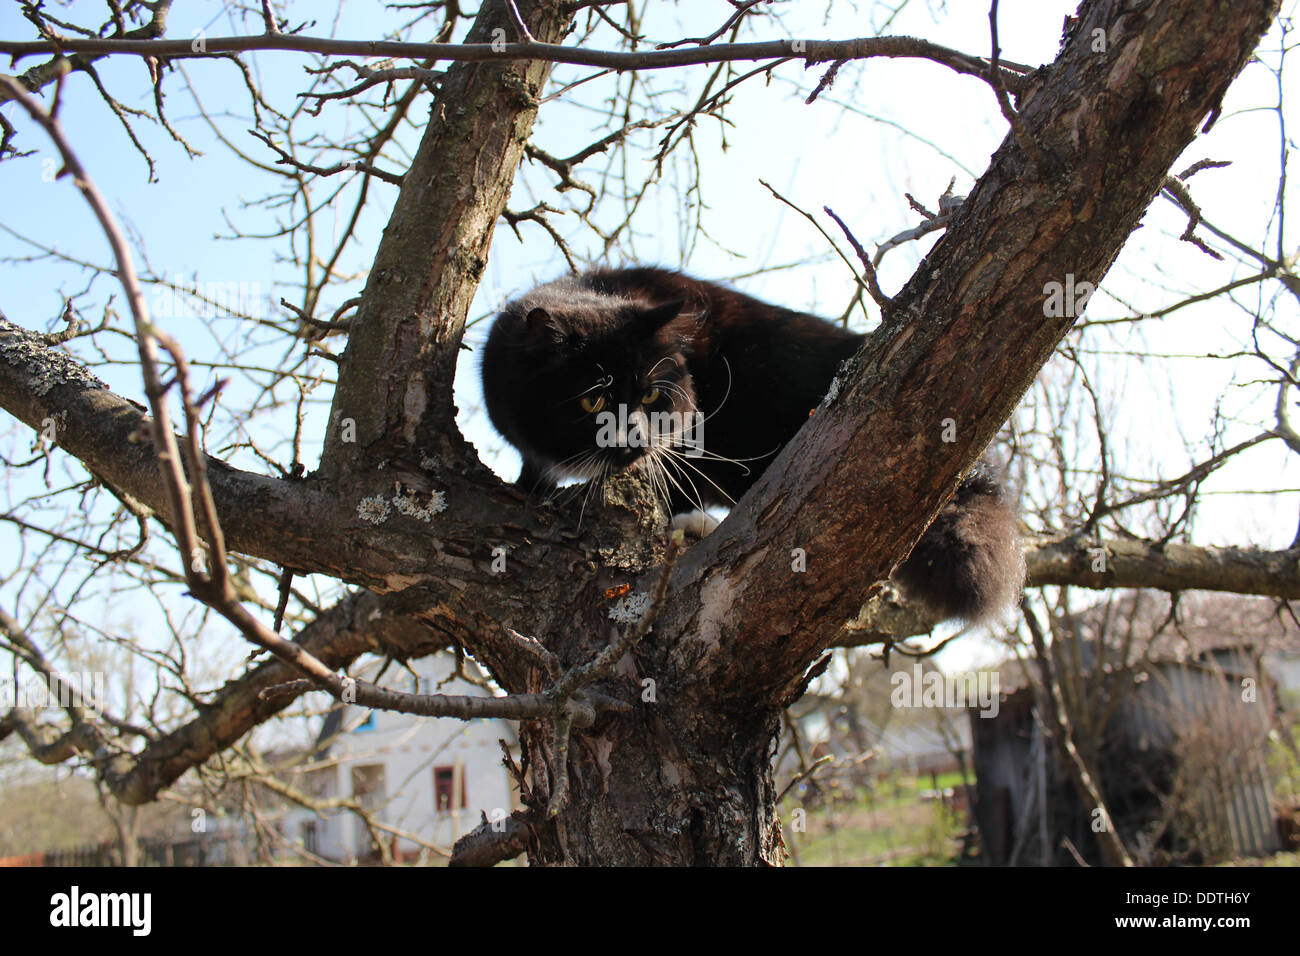 black cat climbing up the tree in the garden Stock Photo